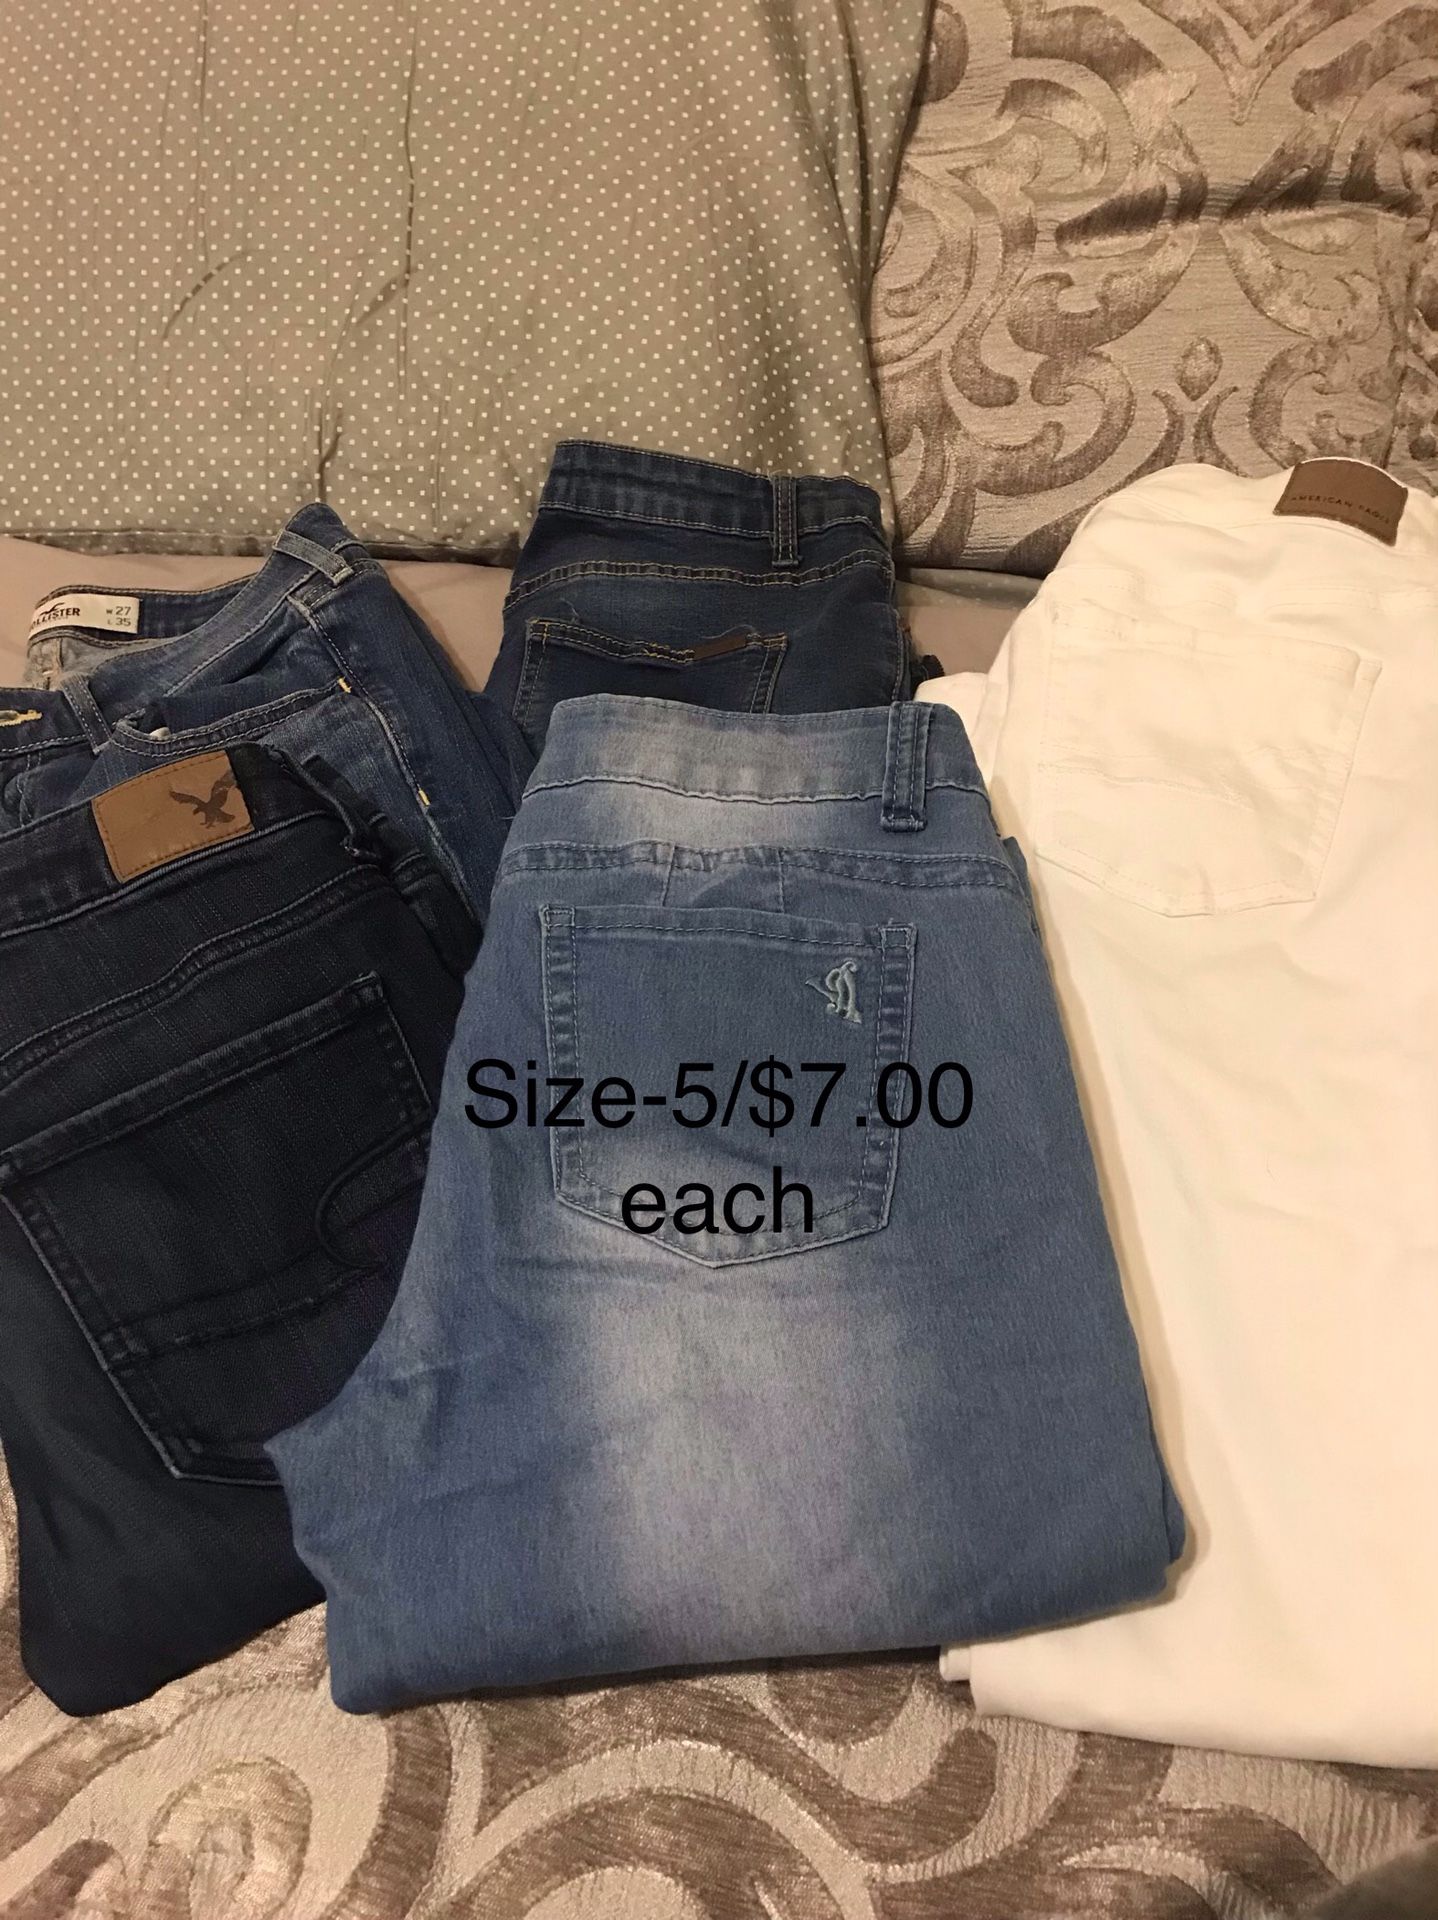 Clothes in great condition